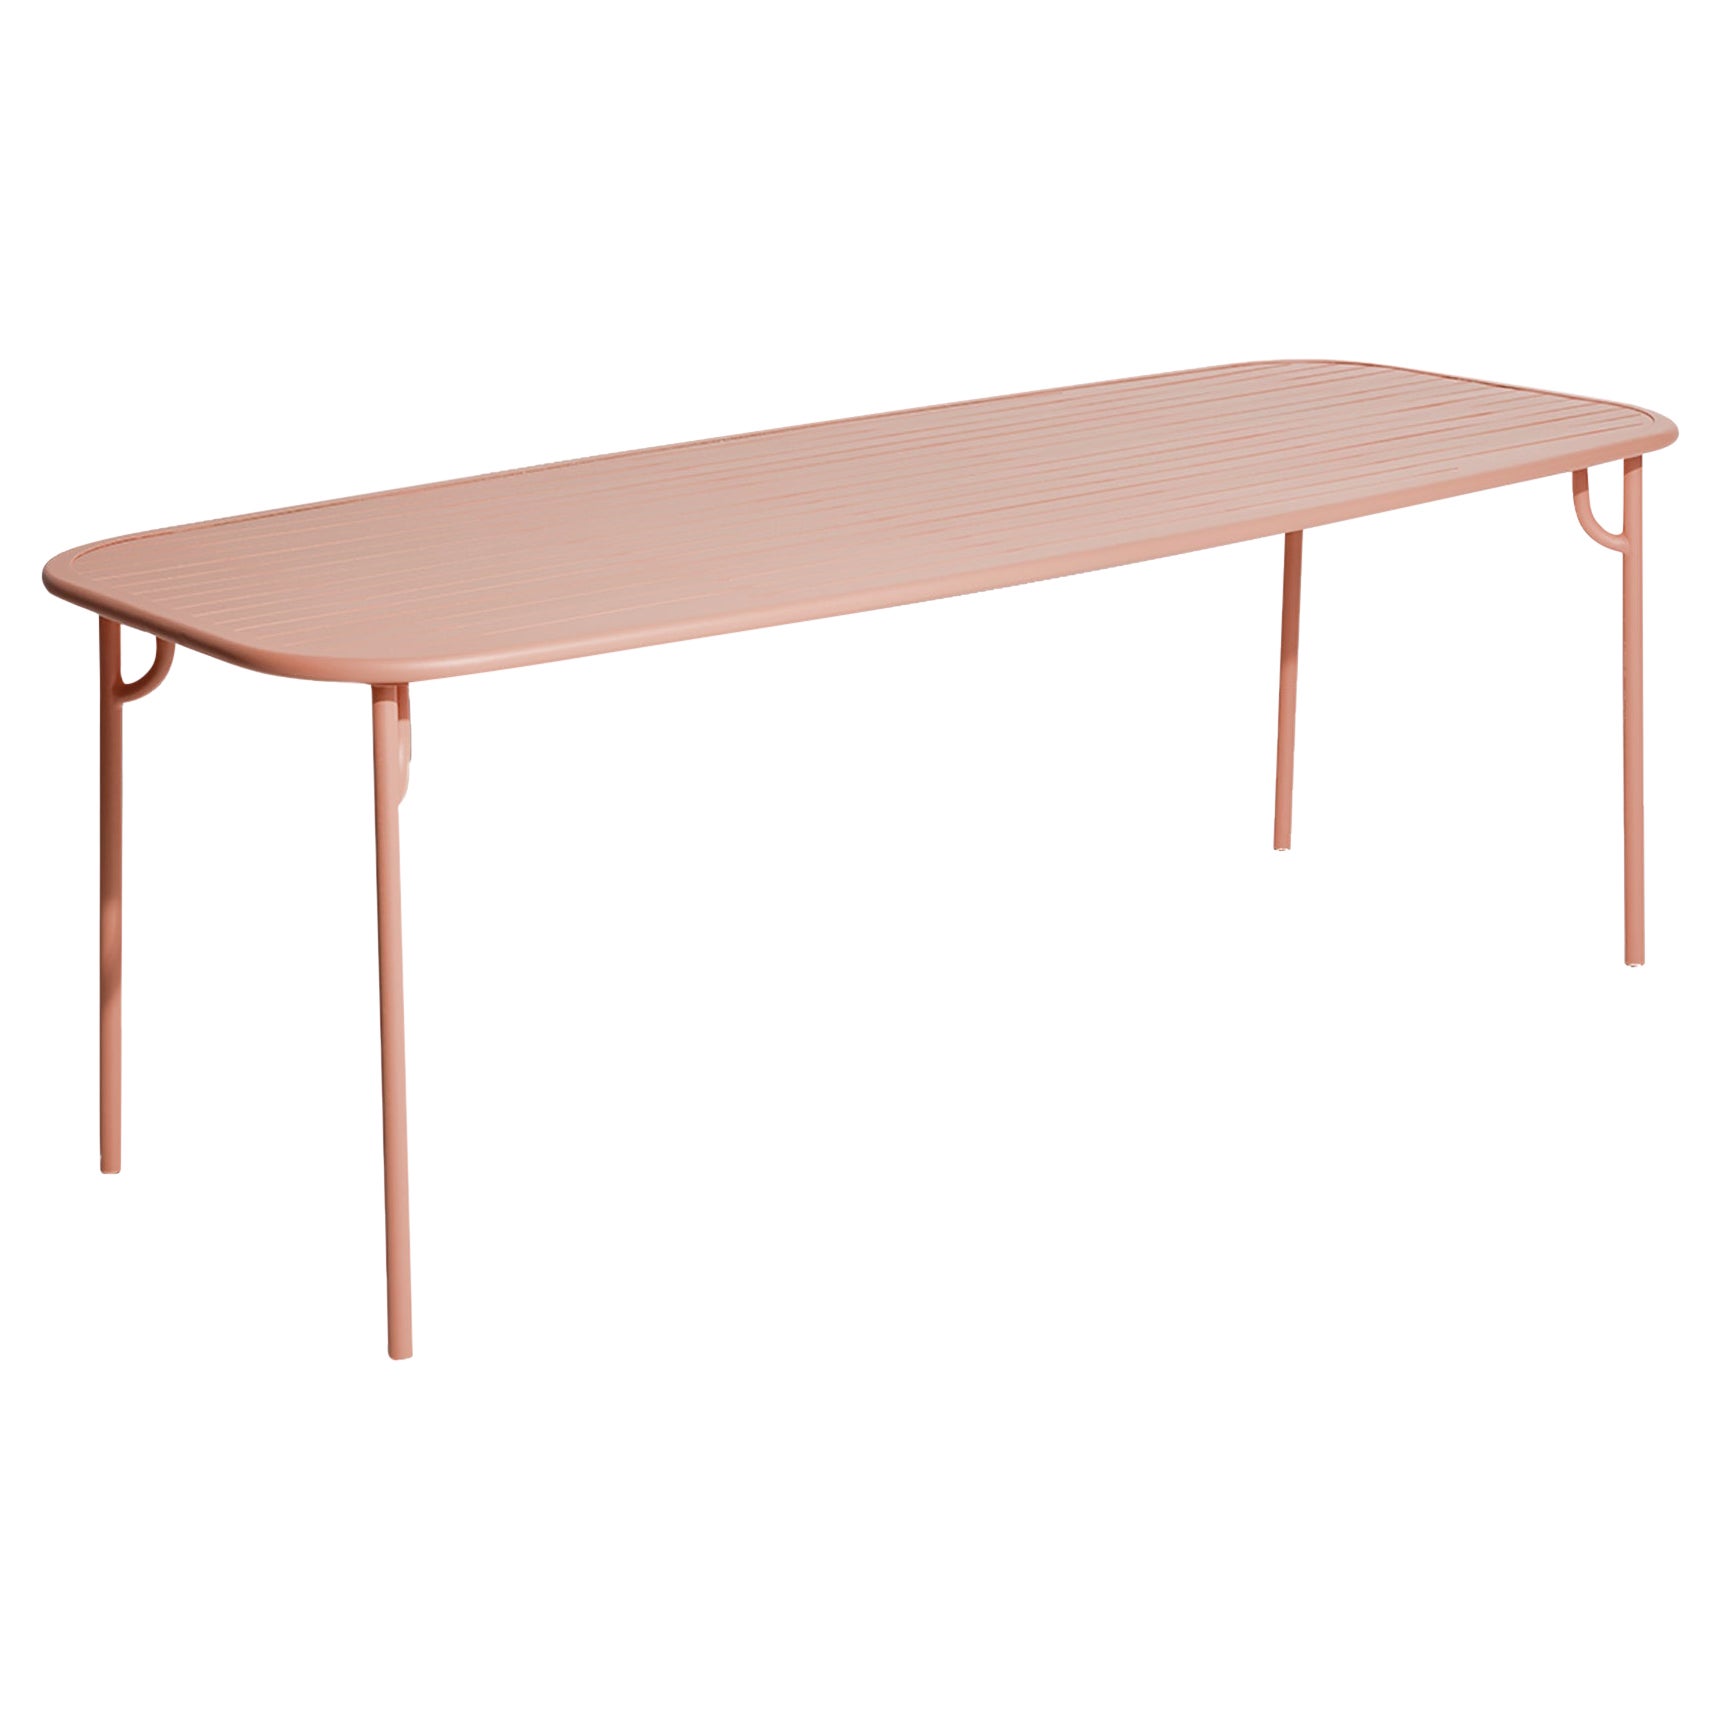 Petite Friture Week-End Large Rectangular Dining Table in Blush with Slats For Sale